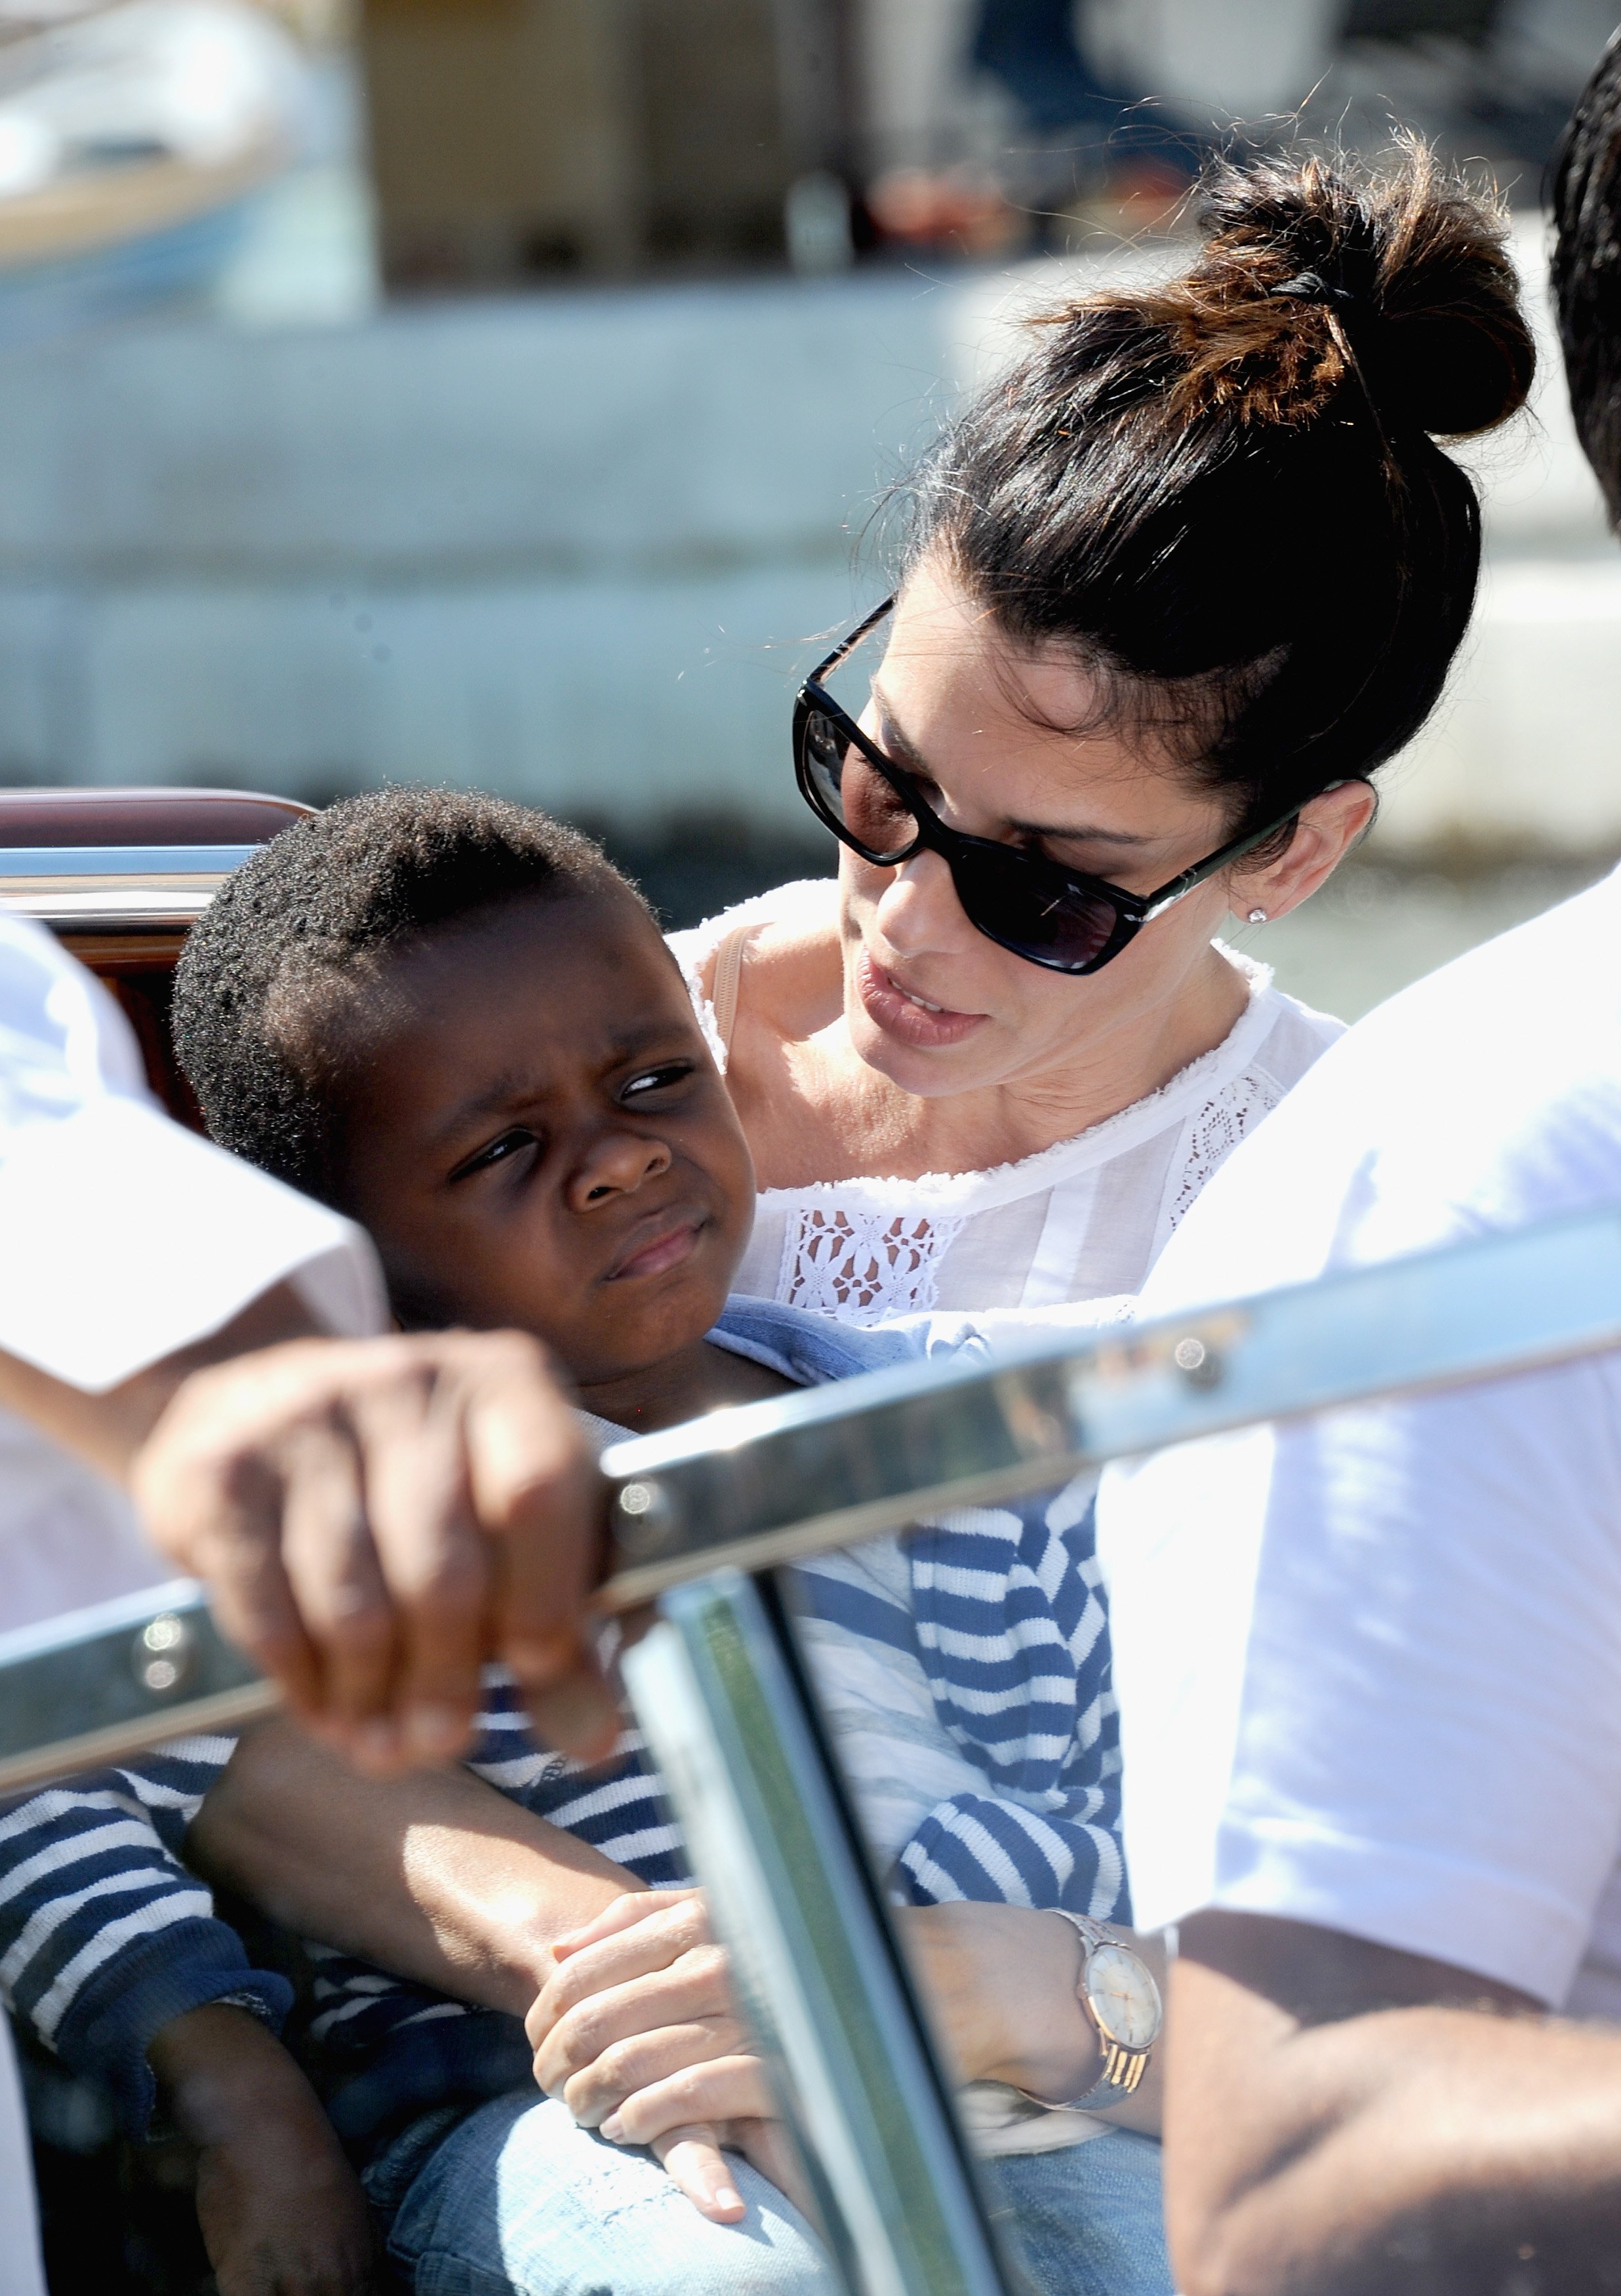 Sandra Bullock and son Louis Bullock during the 70th Venice International Film Festival on August 27, 2013 in Venice, Italy. | Source: Getty Images